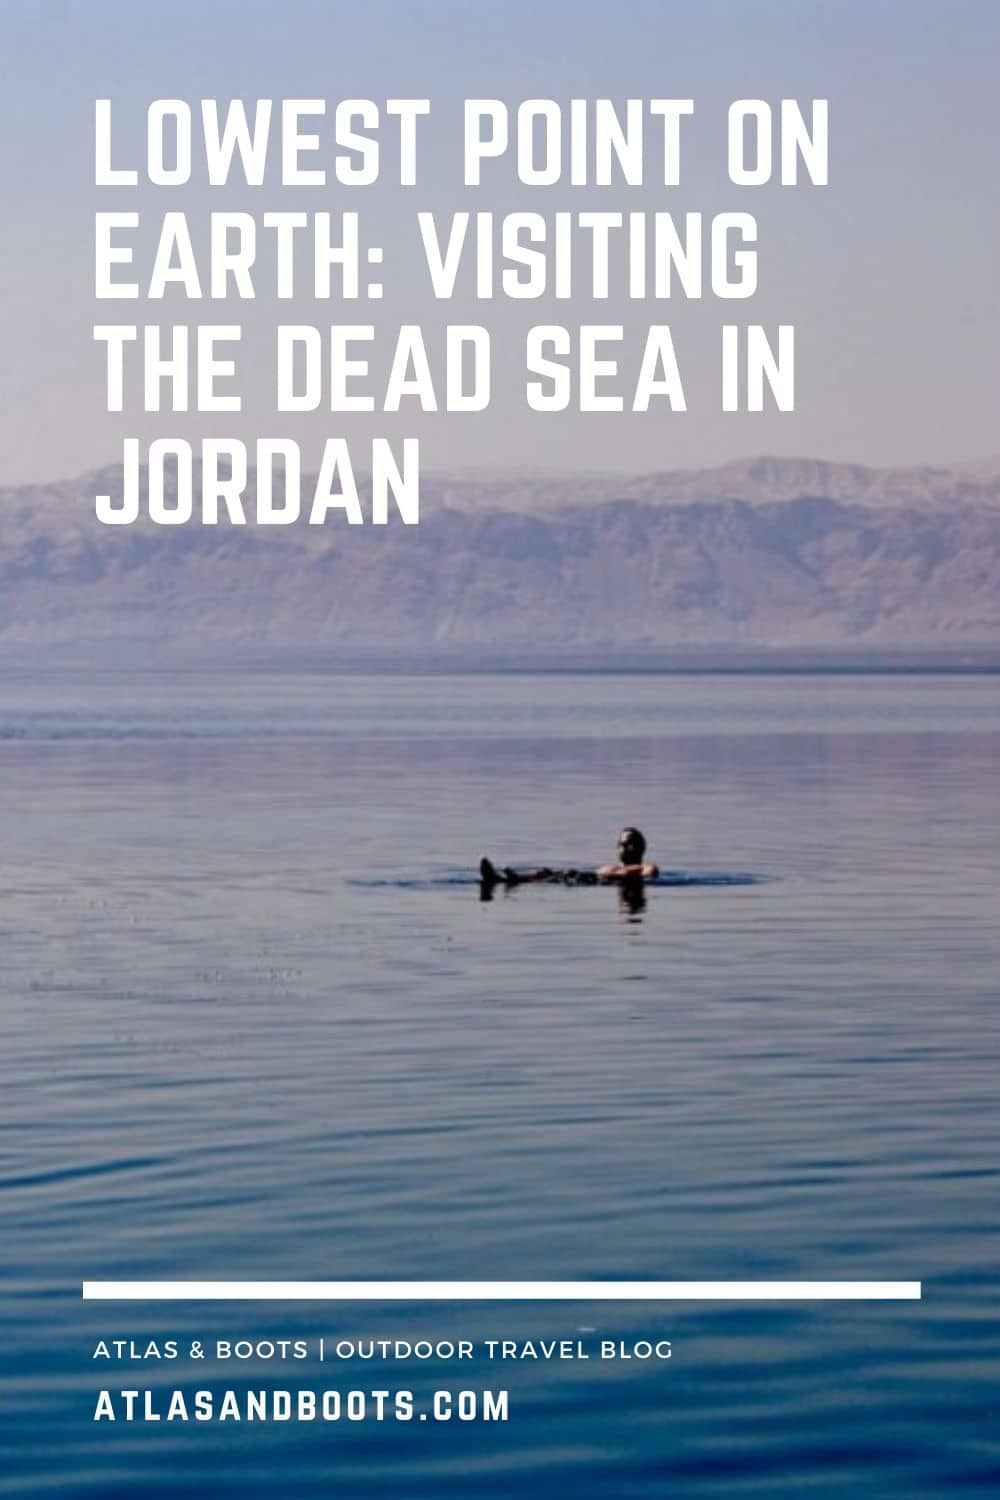 Lowest point on Earth: visiting the Dead Sea - Atlas & Boots